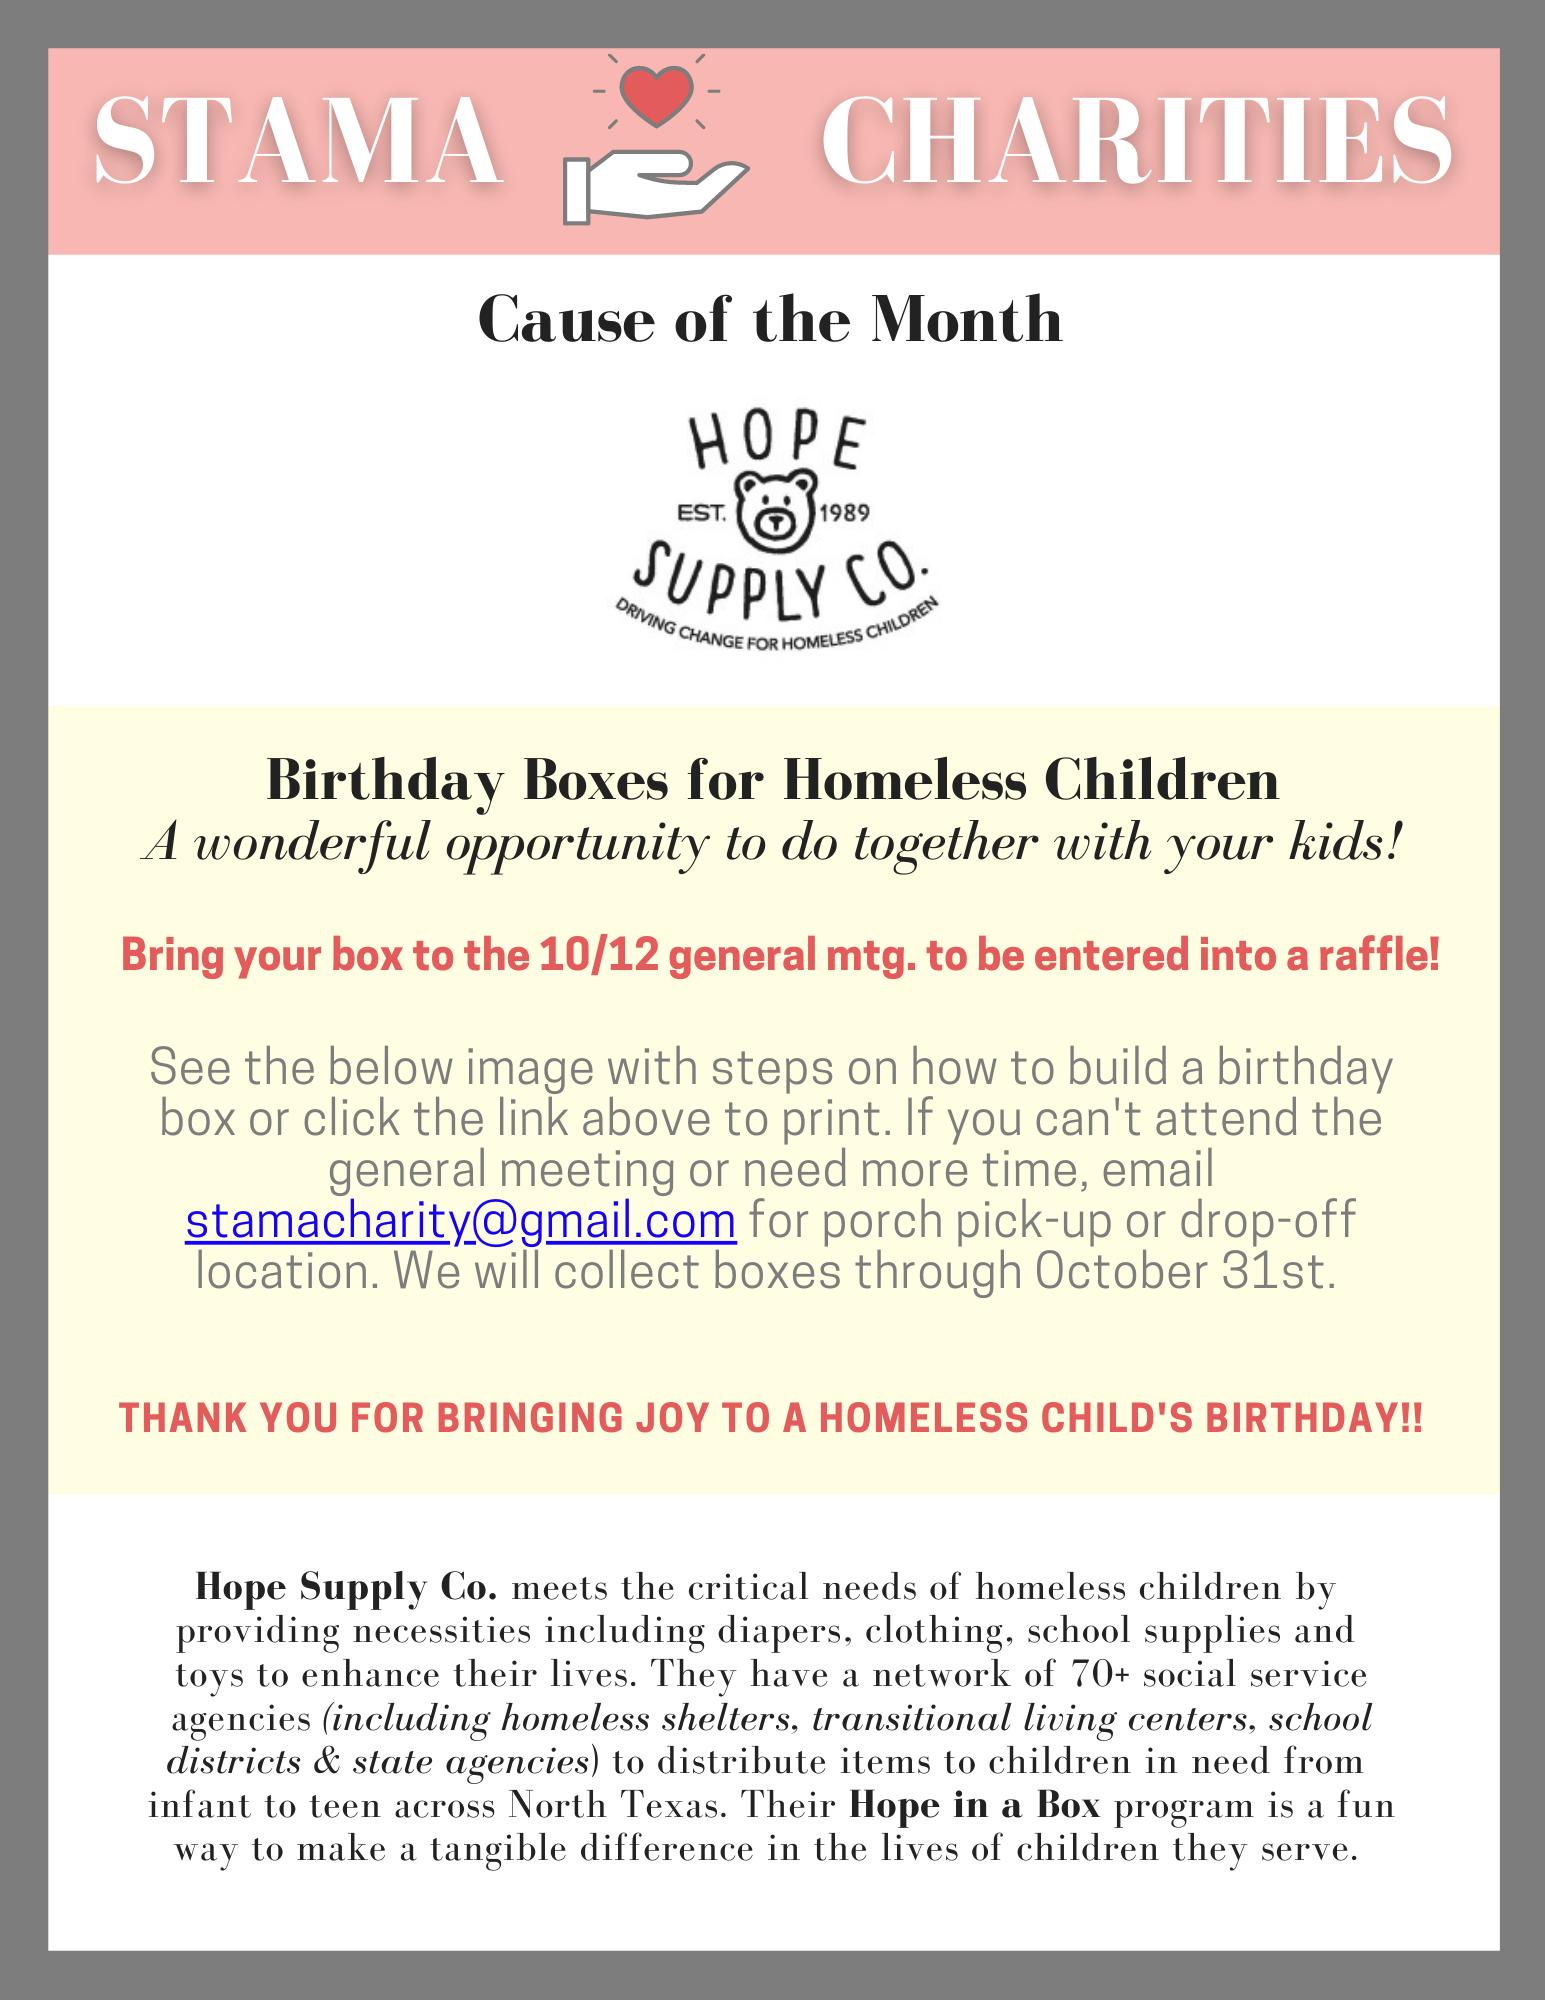 Charities Committee Hope in a Box Birthday Bodxes for Homeless Children